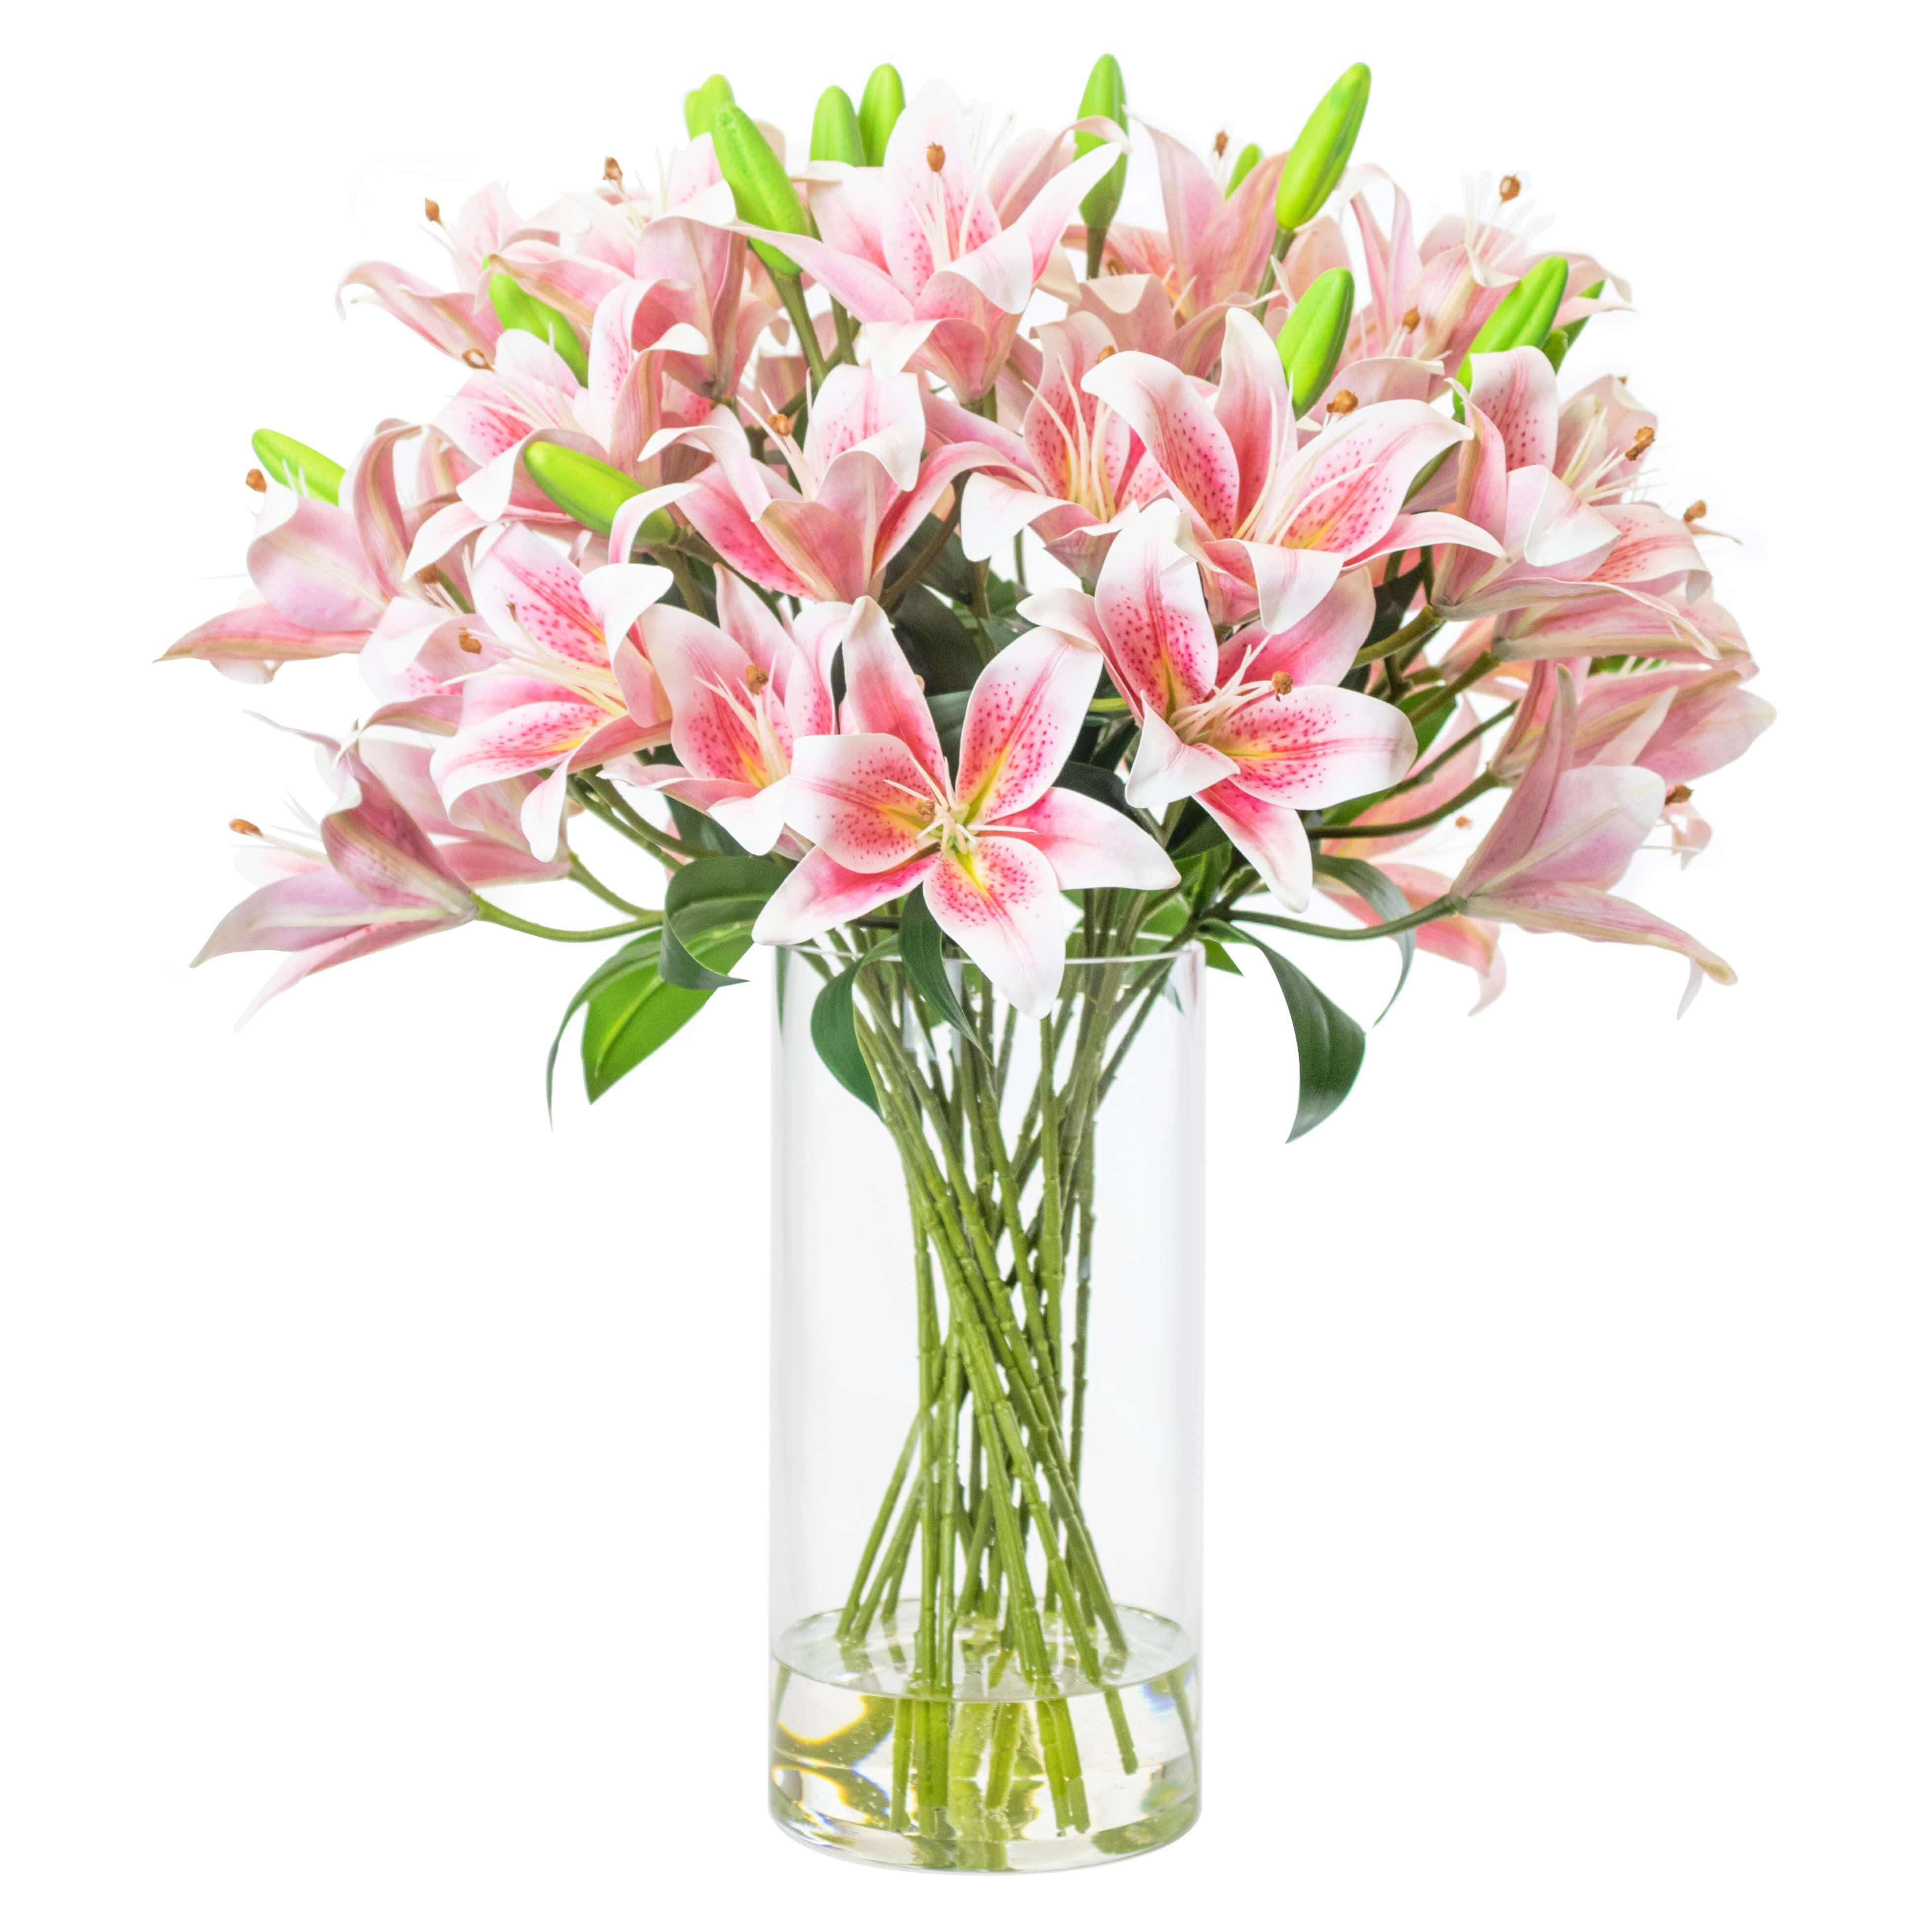 Artificial pink lily arrangement set in tall glass vase